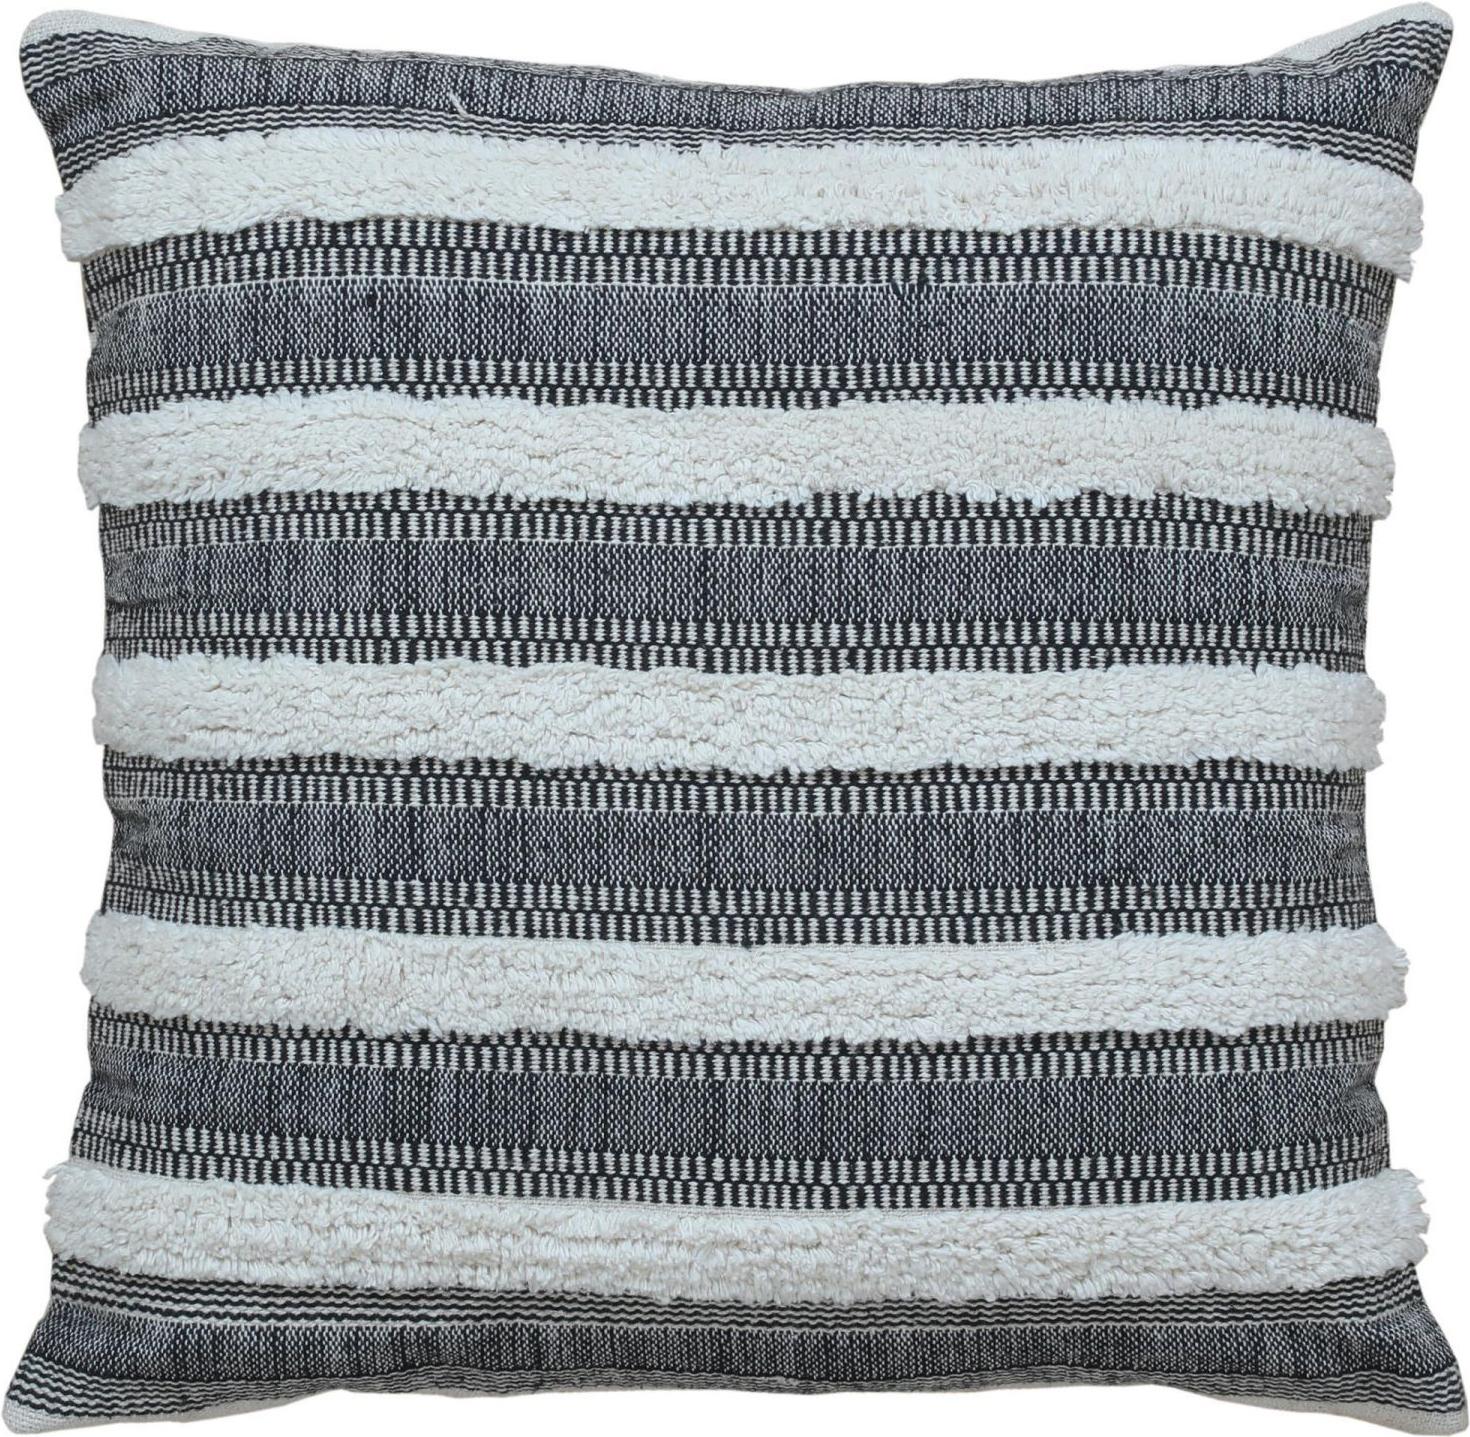 Modern Gray Boho Chic Wool and Cotton Pillow With Geometric Design For Sale